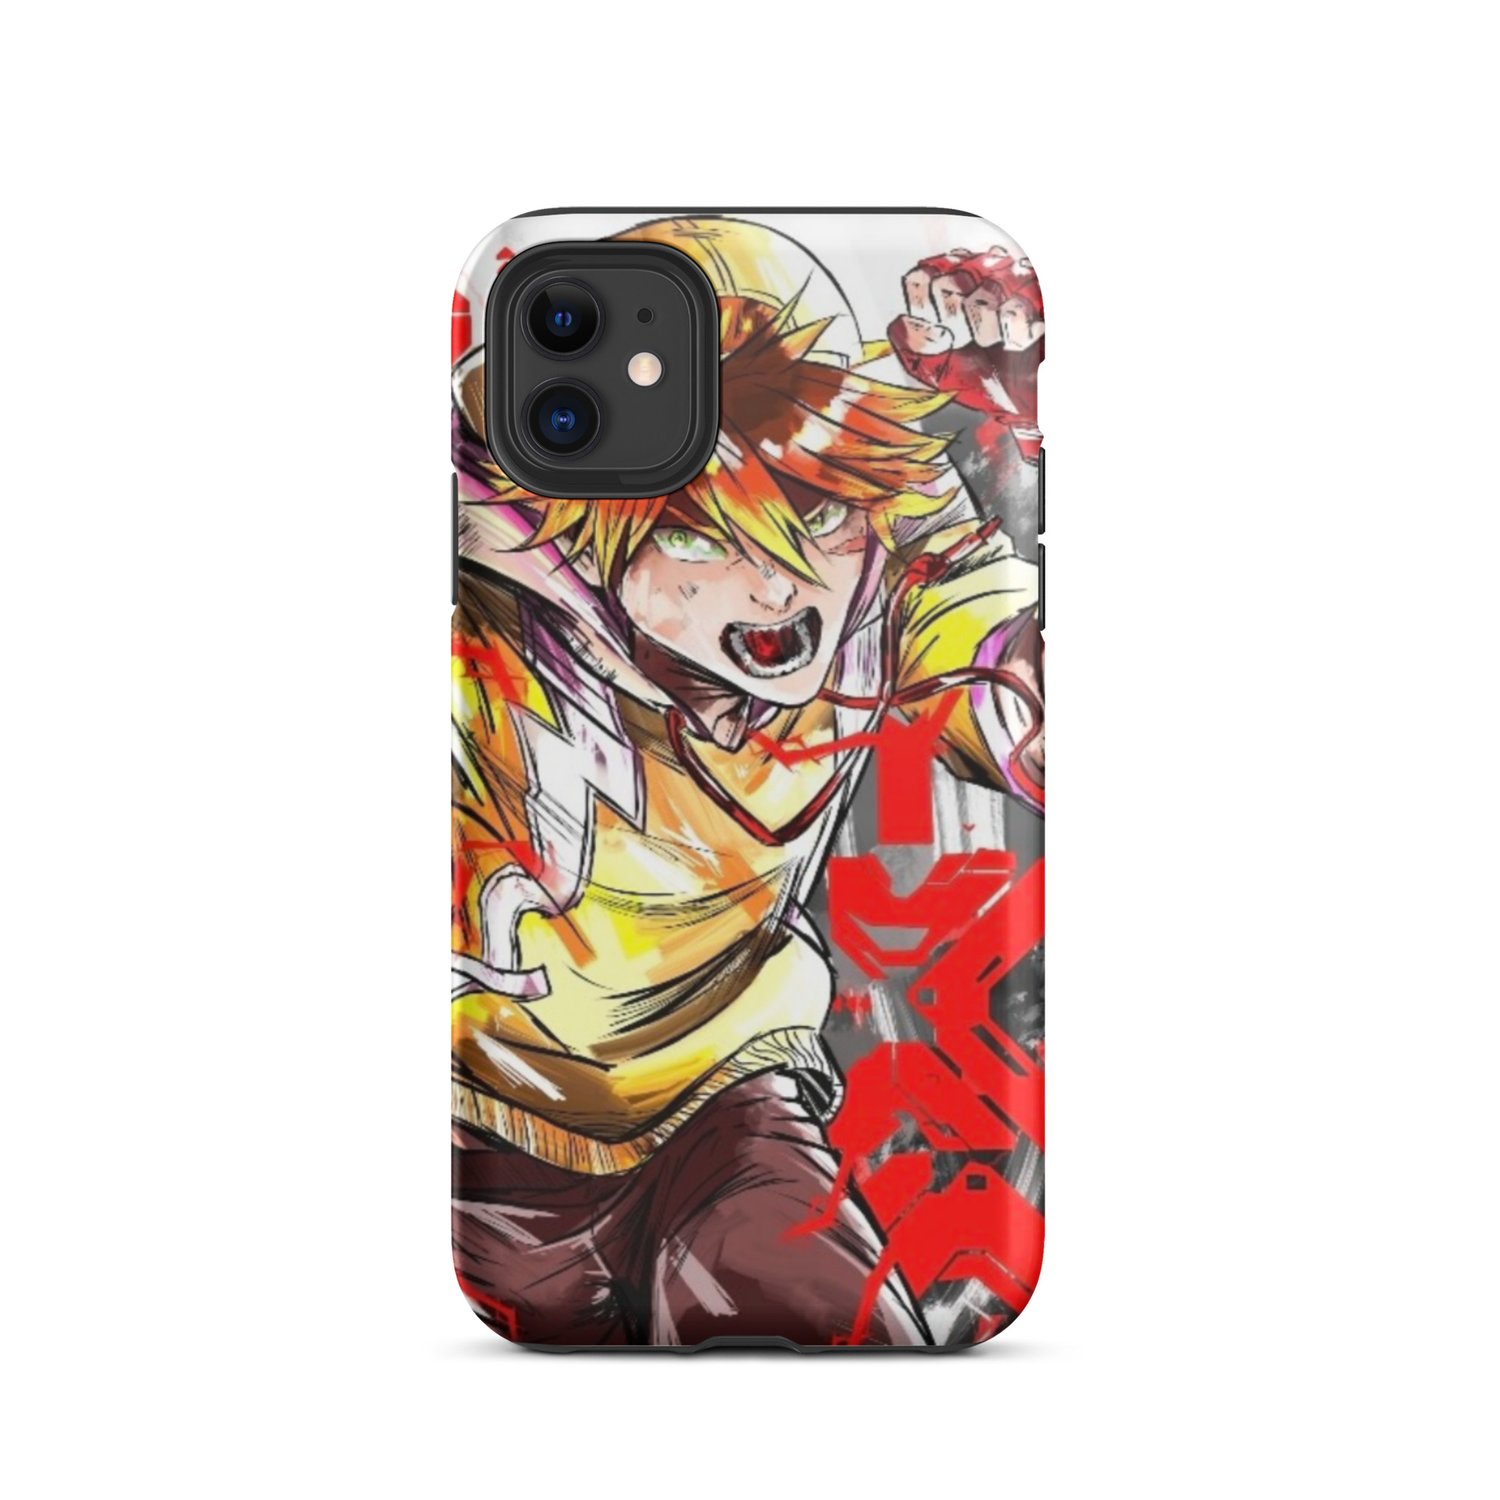 Cool Anime Phone Cases: Protect Your Phone in Style and Showcase Your Fandom